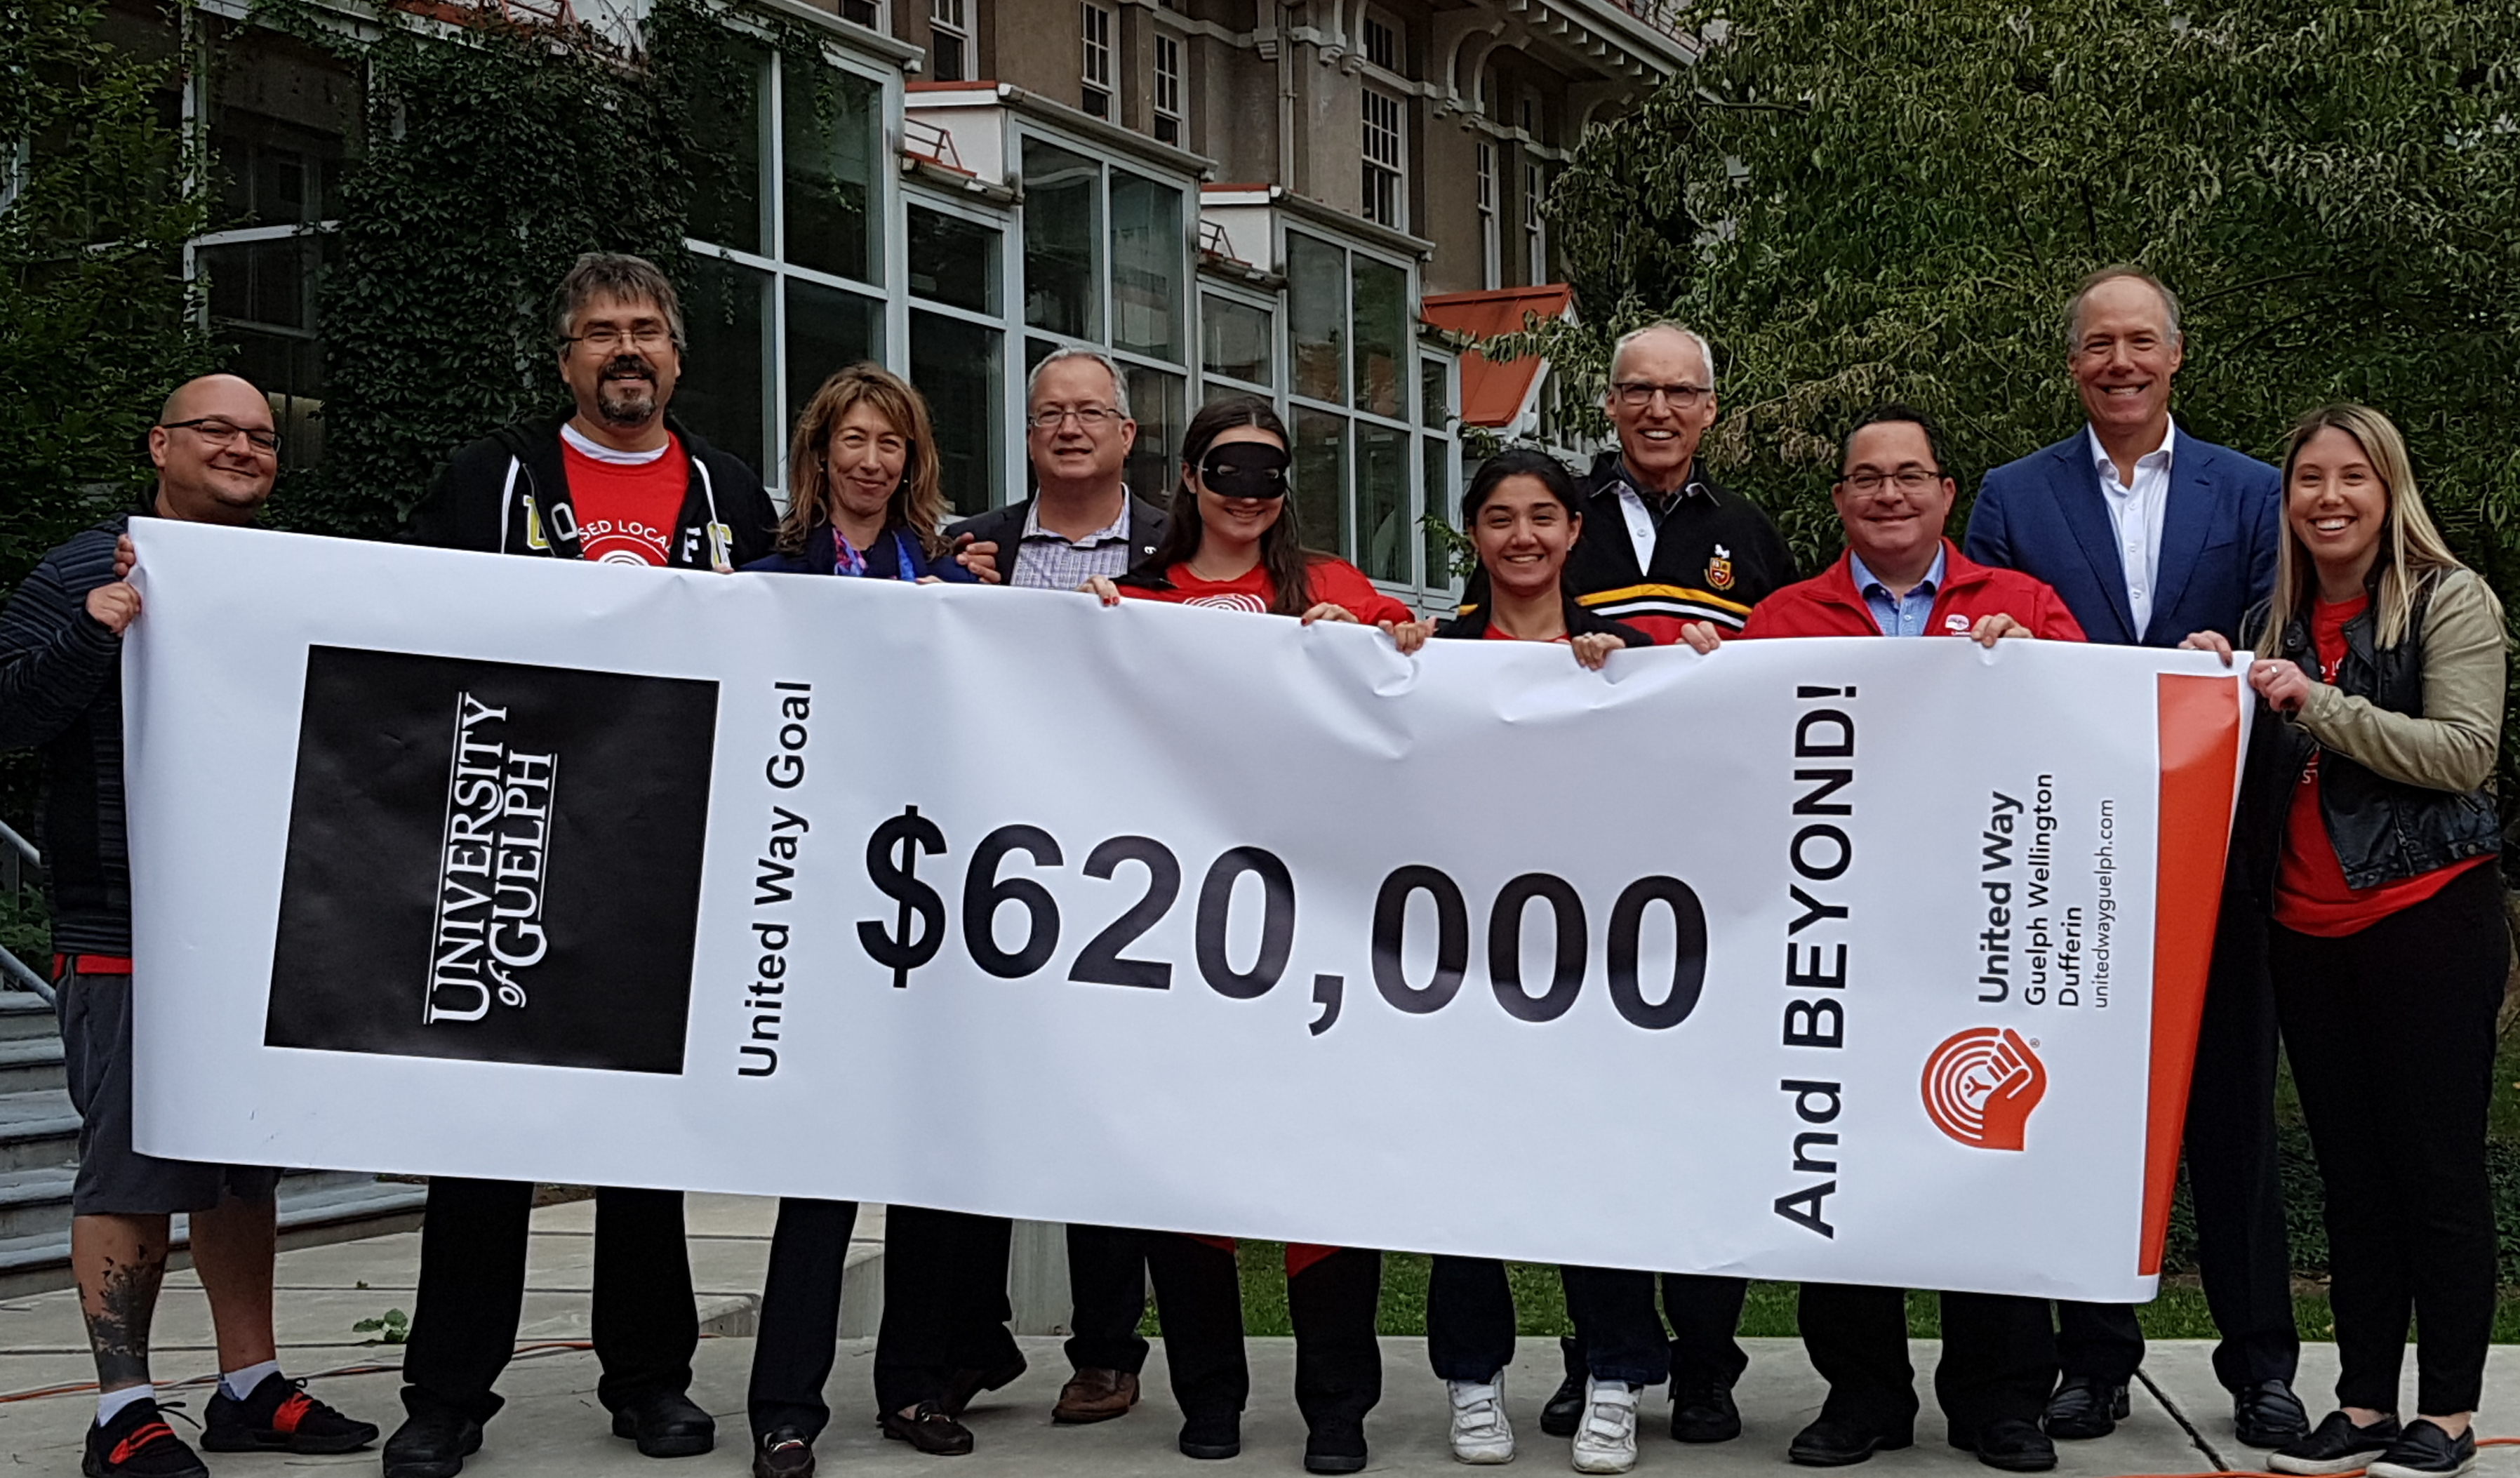 Members of the steering committee and senior leaders hold the 2018 United Way goal: $620,000 and beyond